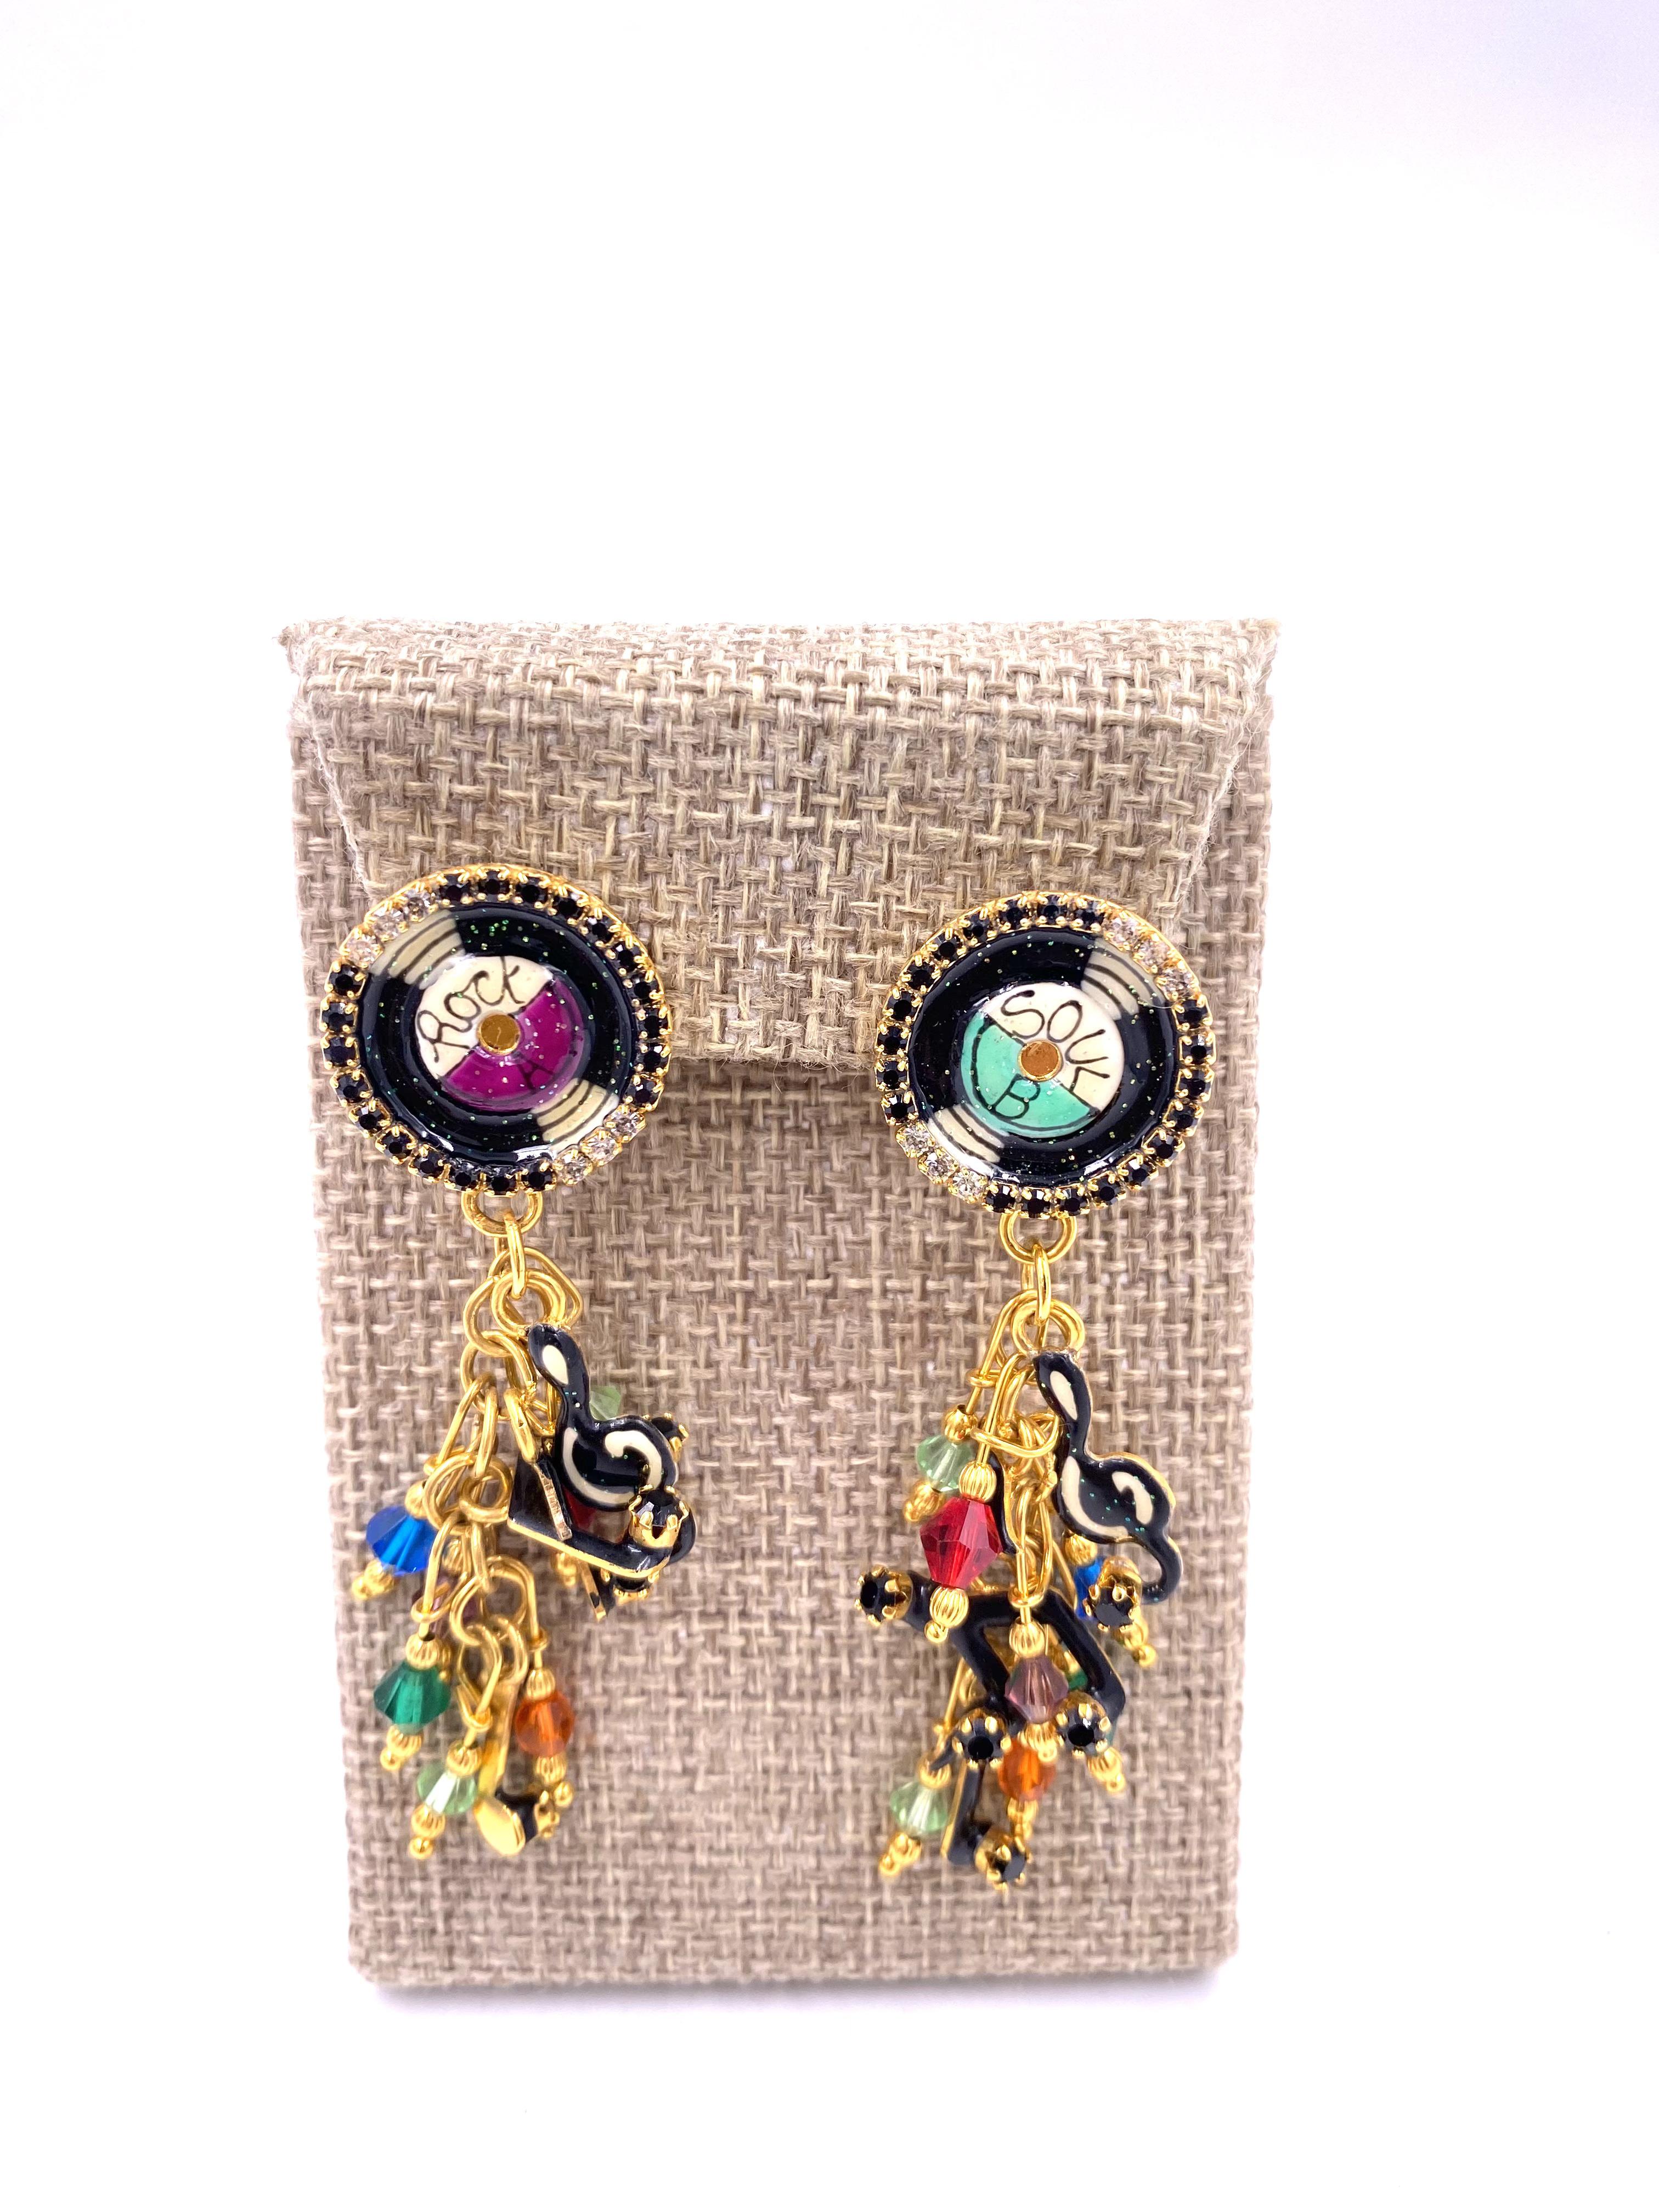 Indulge in elegance with Lunch at the Ritz Earrings, featuring a harmonious blend of vibrant multicolor beads, black and clear rhinestones, and gold trim. The circular vinyl detail adds a touch of musical rhythm to these luxurious earrings. Elevate